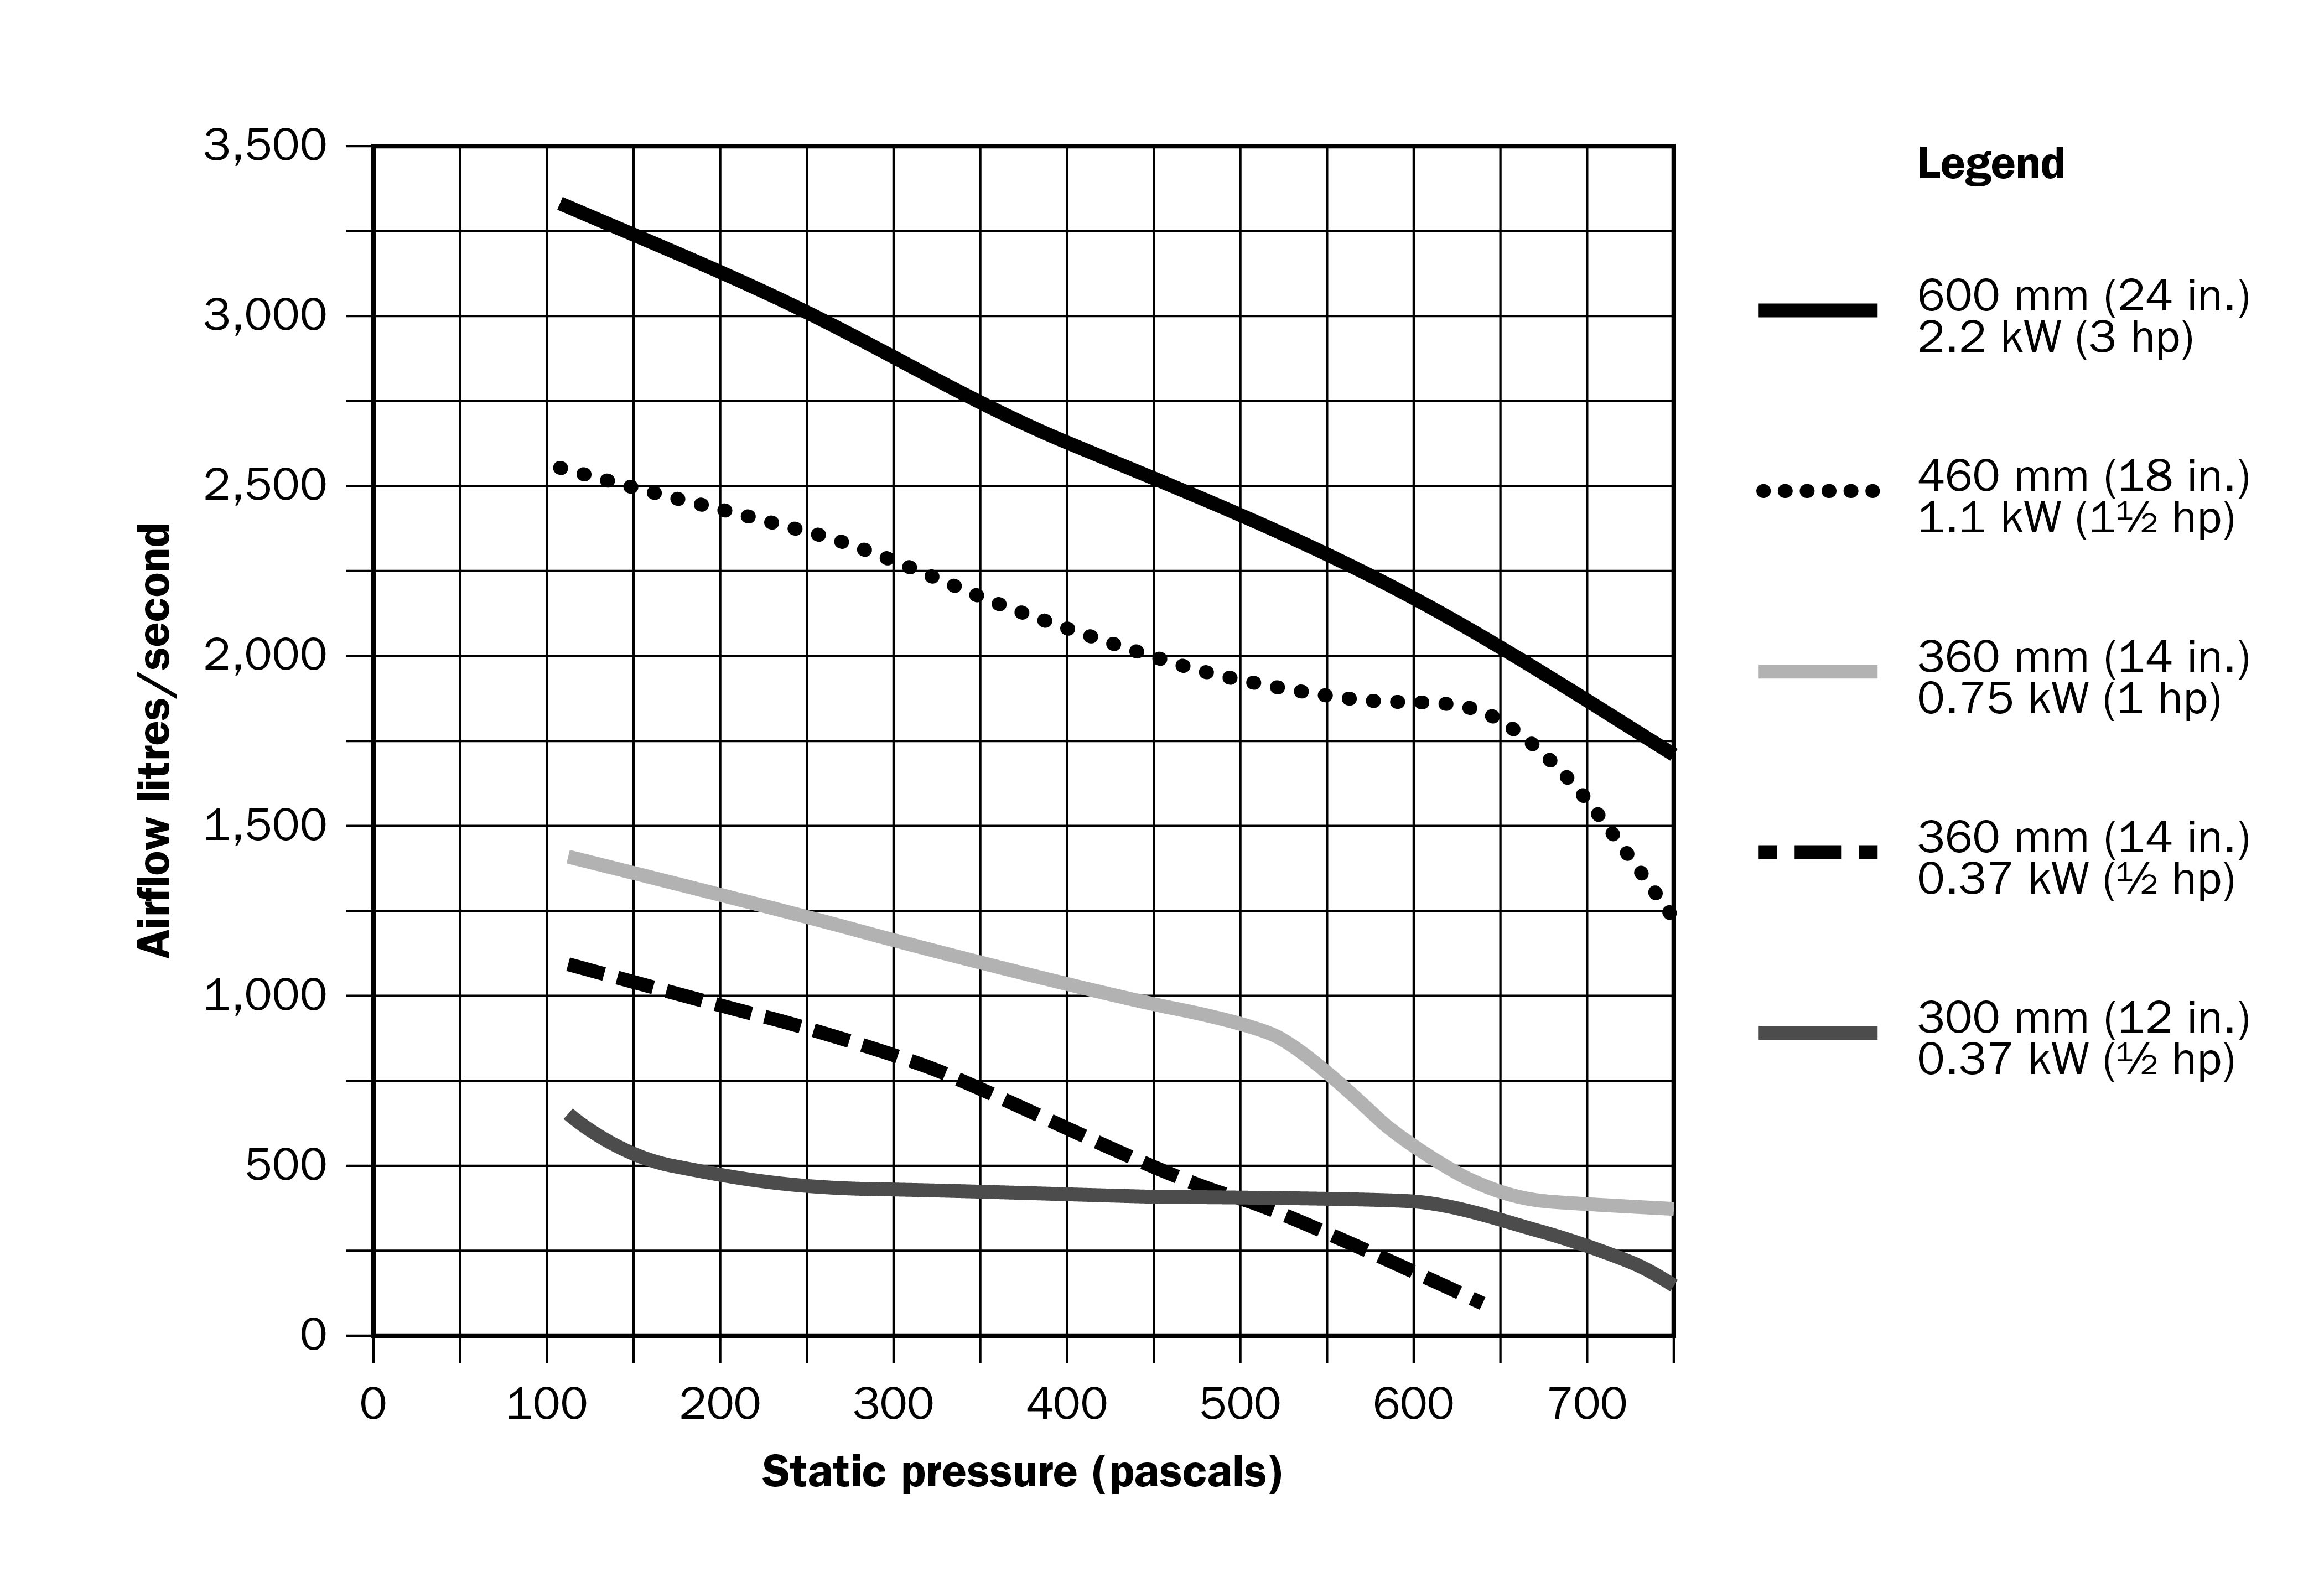 This chart shows the relationship between airflow and static pressure for several common sizes of axial fans.  Once the system requirements for airflow and static pressure are known, the chart can be used to identify an appropriate fan size.